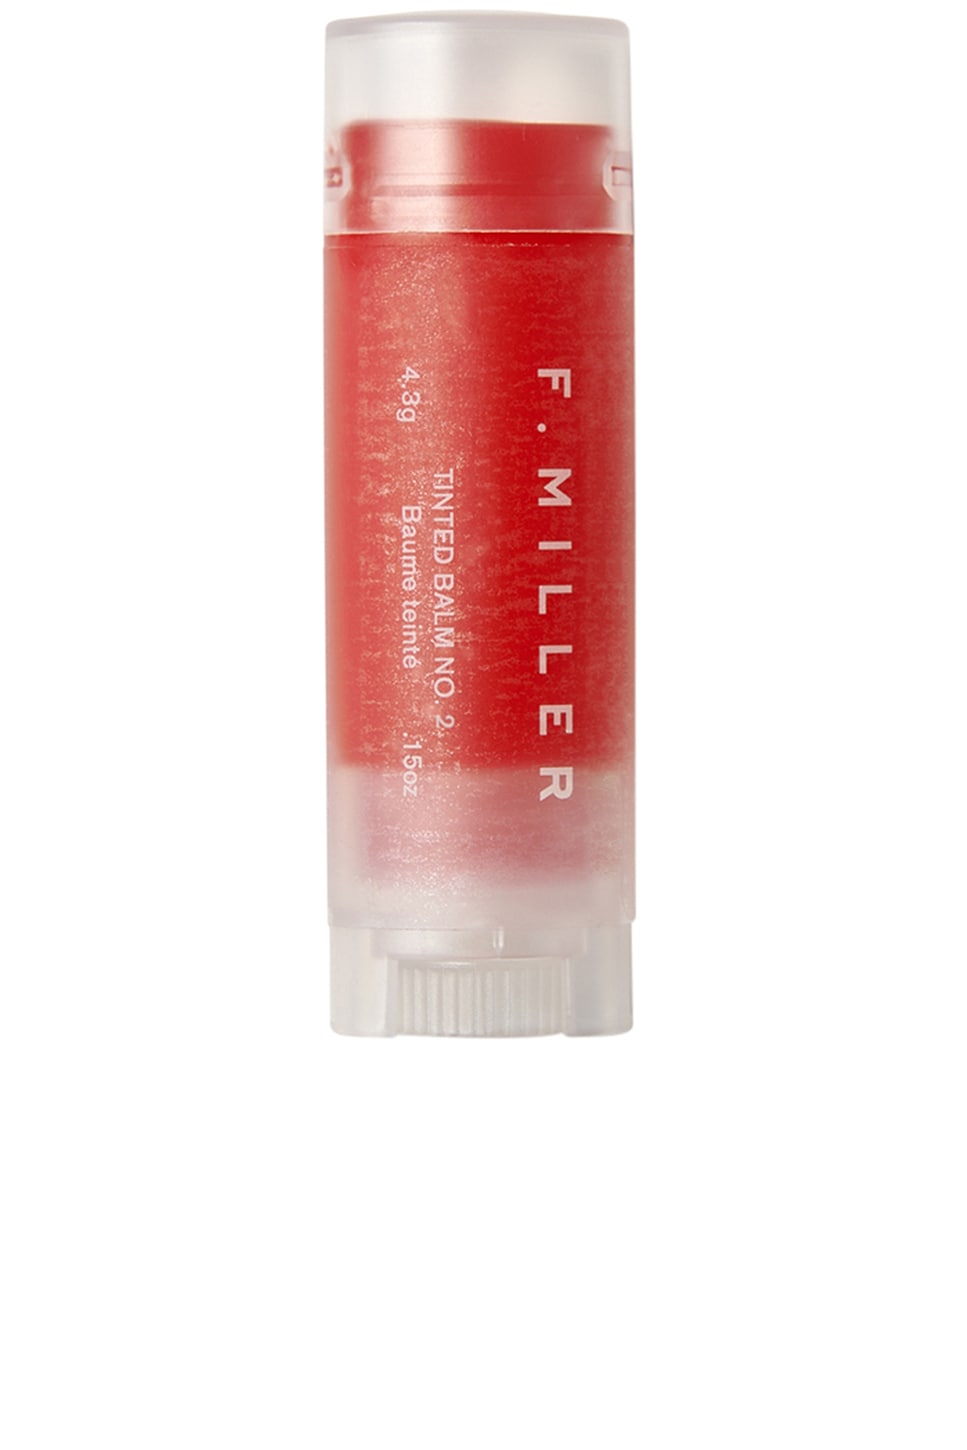 Tinted Balm No.2 in Coral